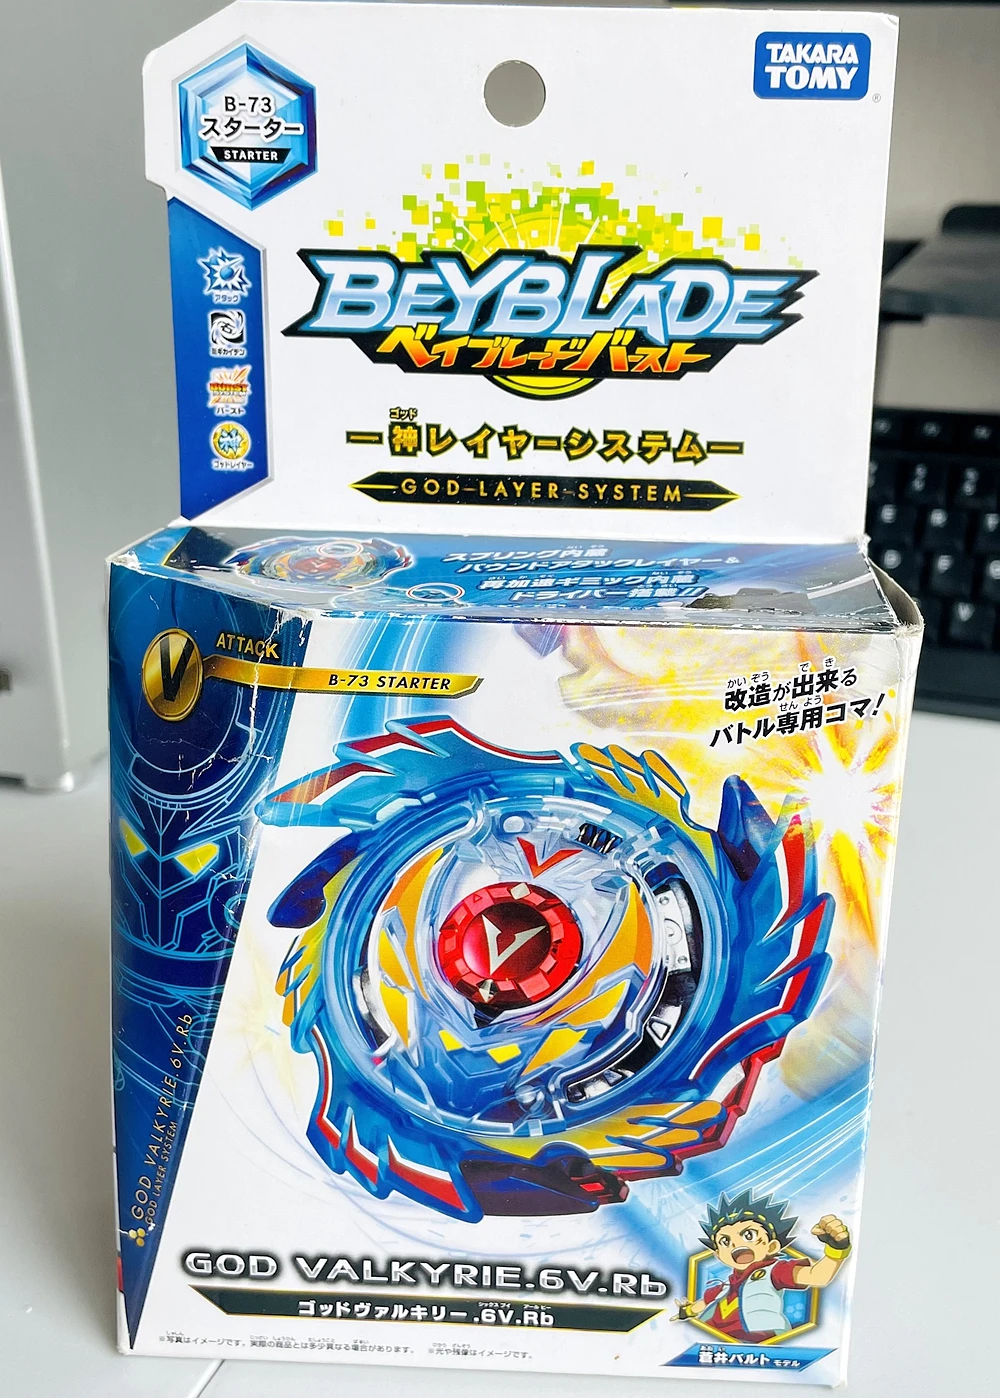 

Original TAKARA TOMY BEYBLADE BURST B-73 STARTER GOD VALKRIE. 6V.Rb-The box has been opened and the stickers have been used